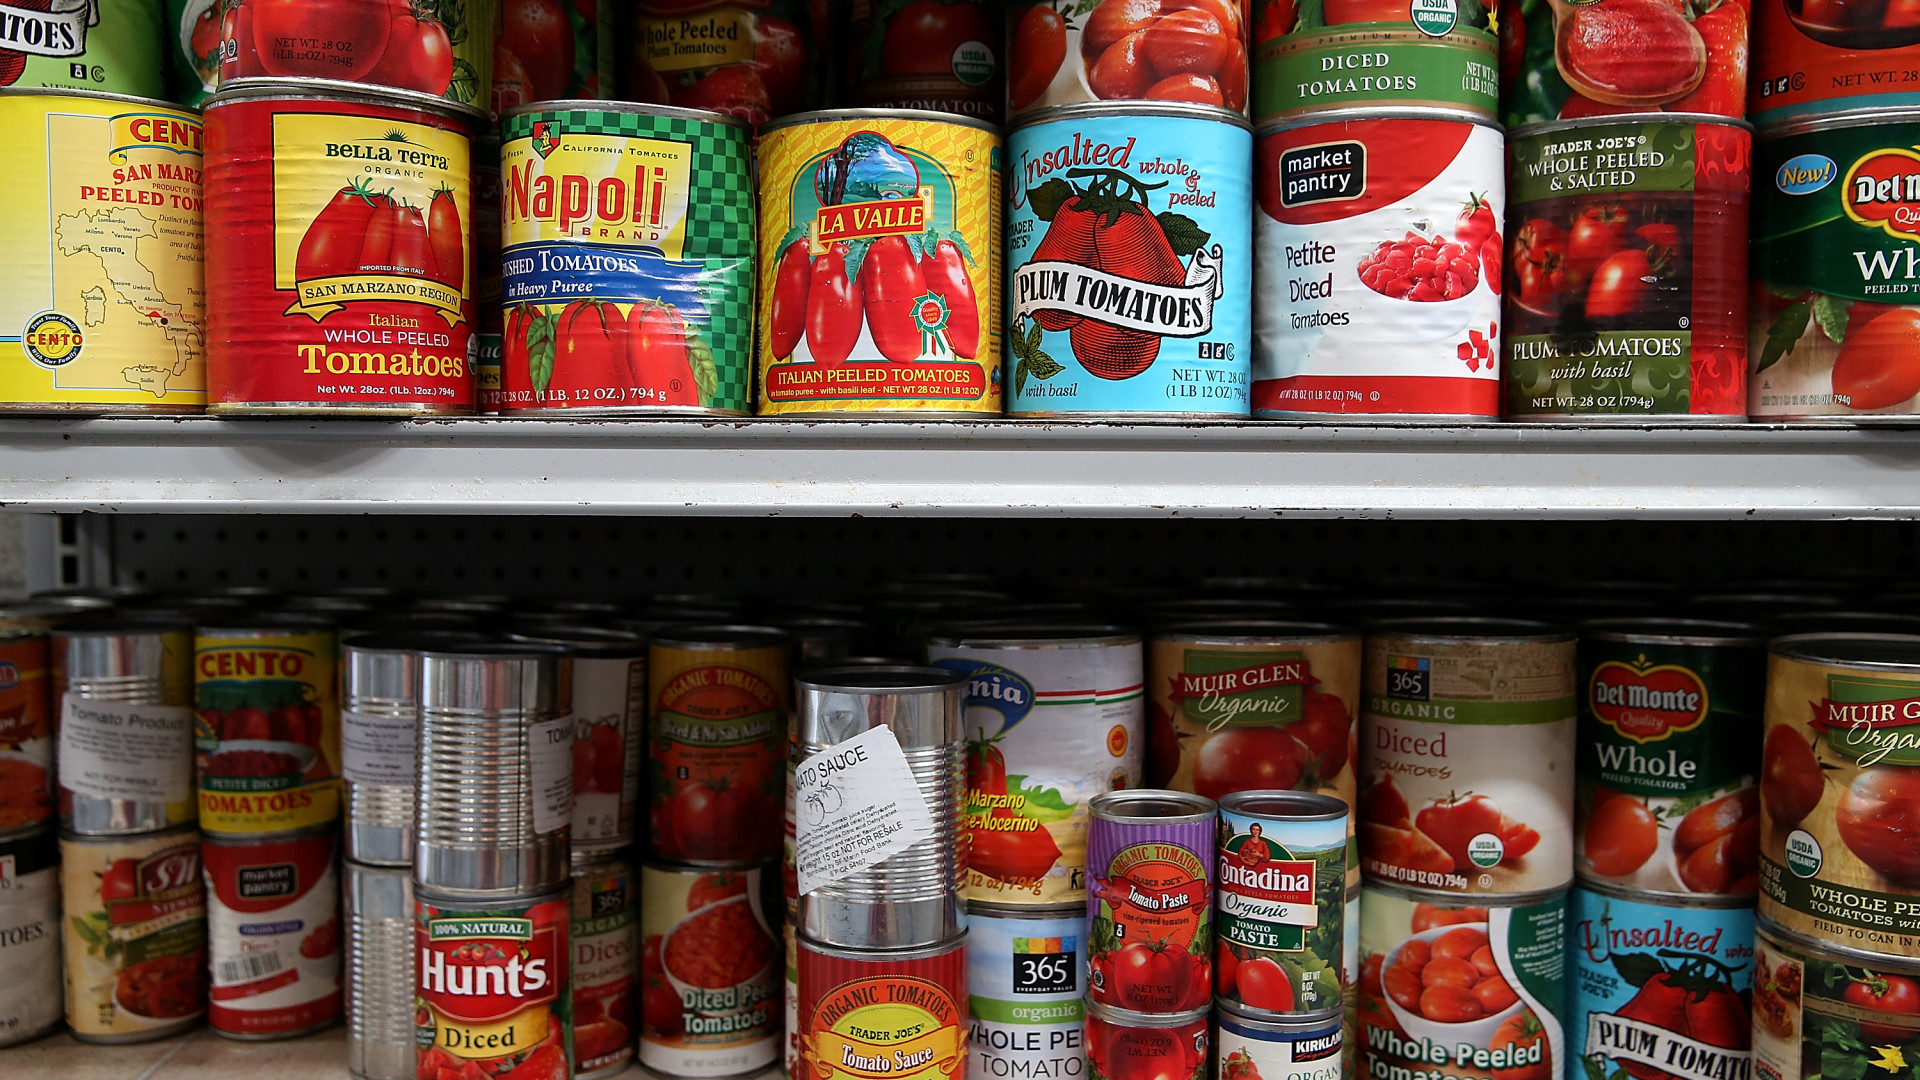 SAN FRANCISCO, CA - MAY 01: Canned tomatoes line the shelves of a pantry at the SF-Marin Food Bank on May 1, 2014 in San Francisco, California. Food banks are bracing for higher food costs and an increased demand for food from the needy as food prices are skyrocketing due to a reduction in food stamps and drought conditions in several states. (Photo by Justin Sullivan/Getty Images)